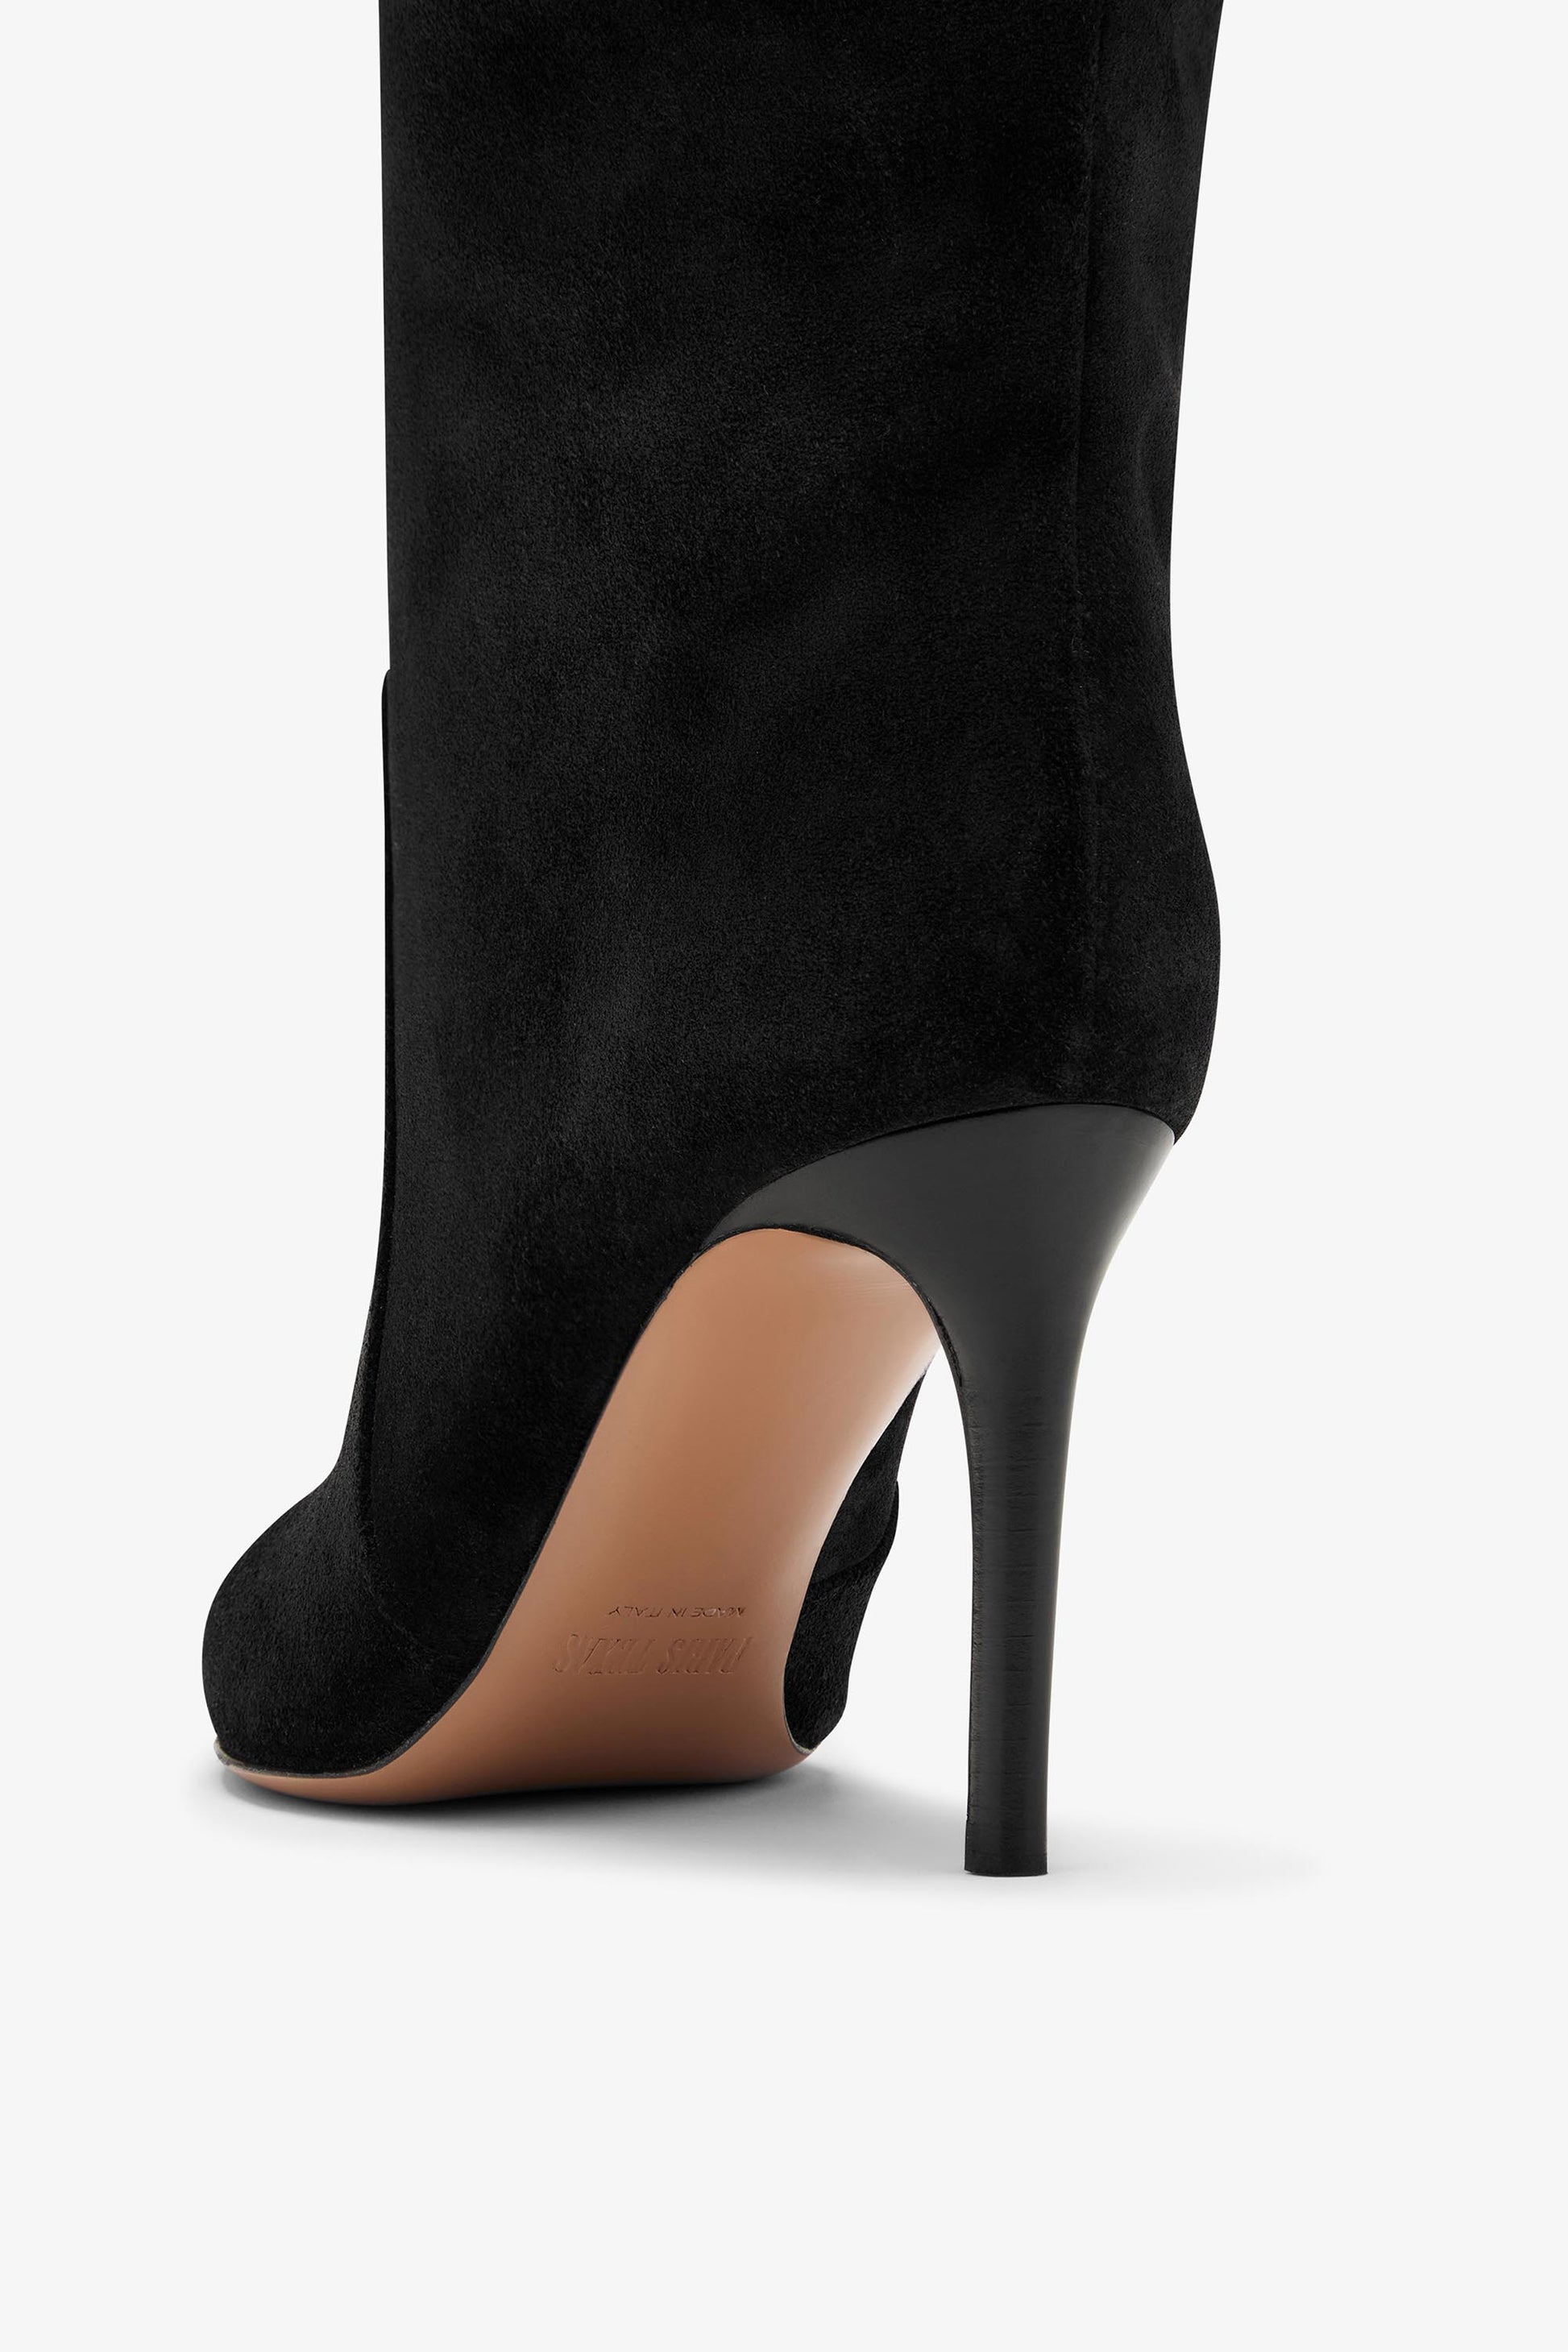 Black suede ankle boot